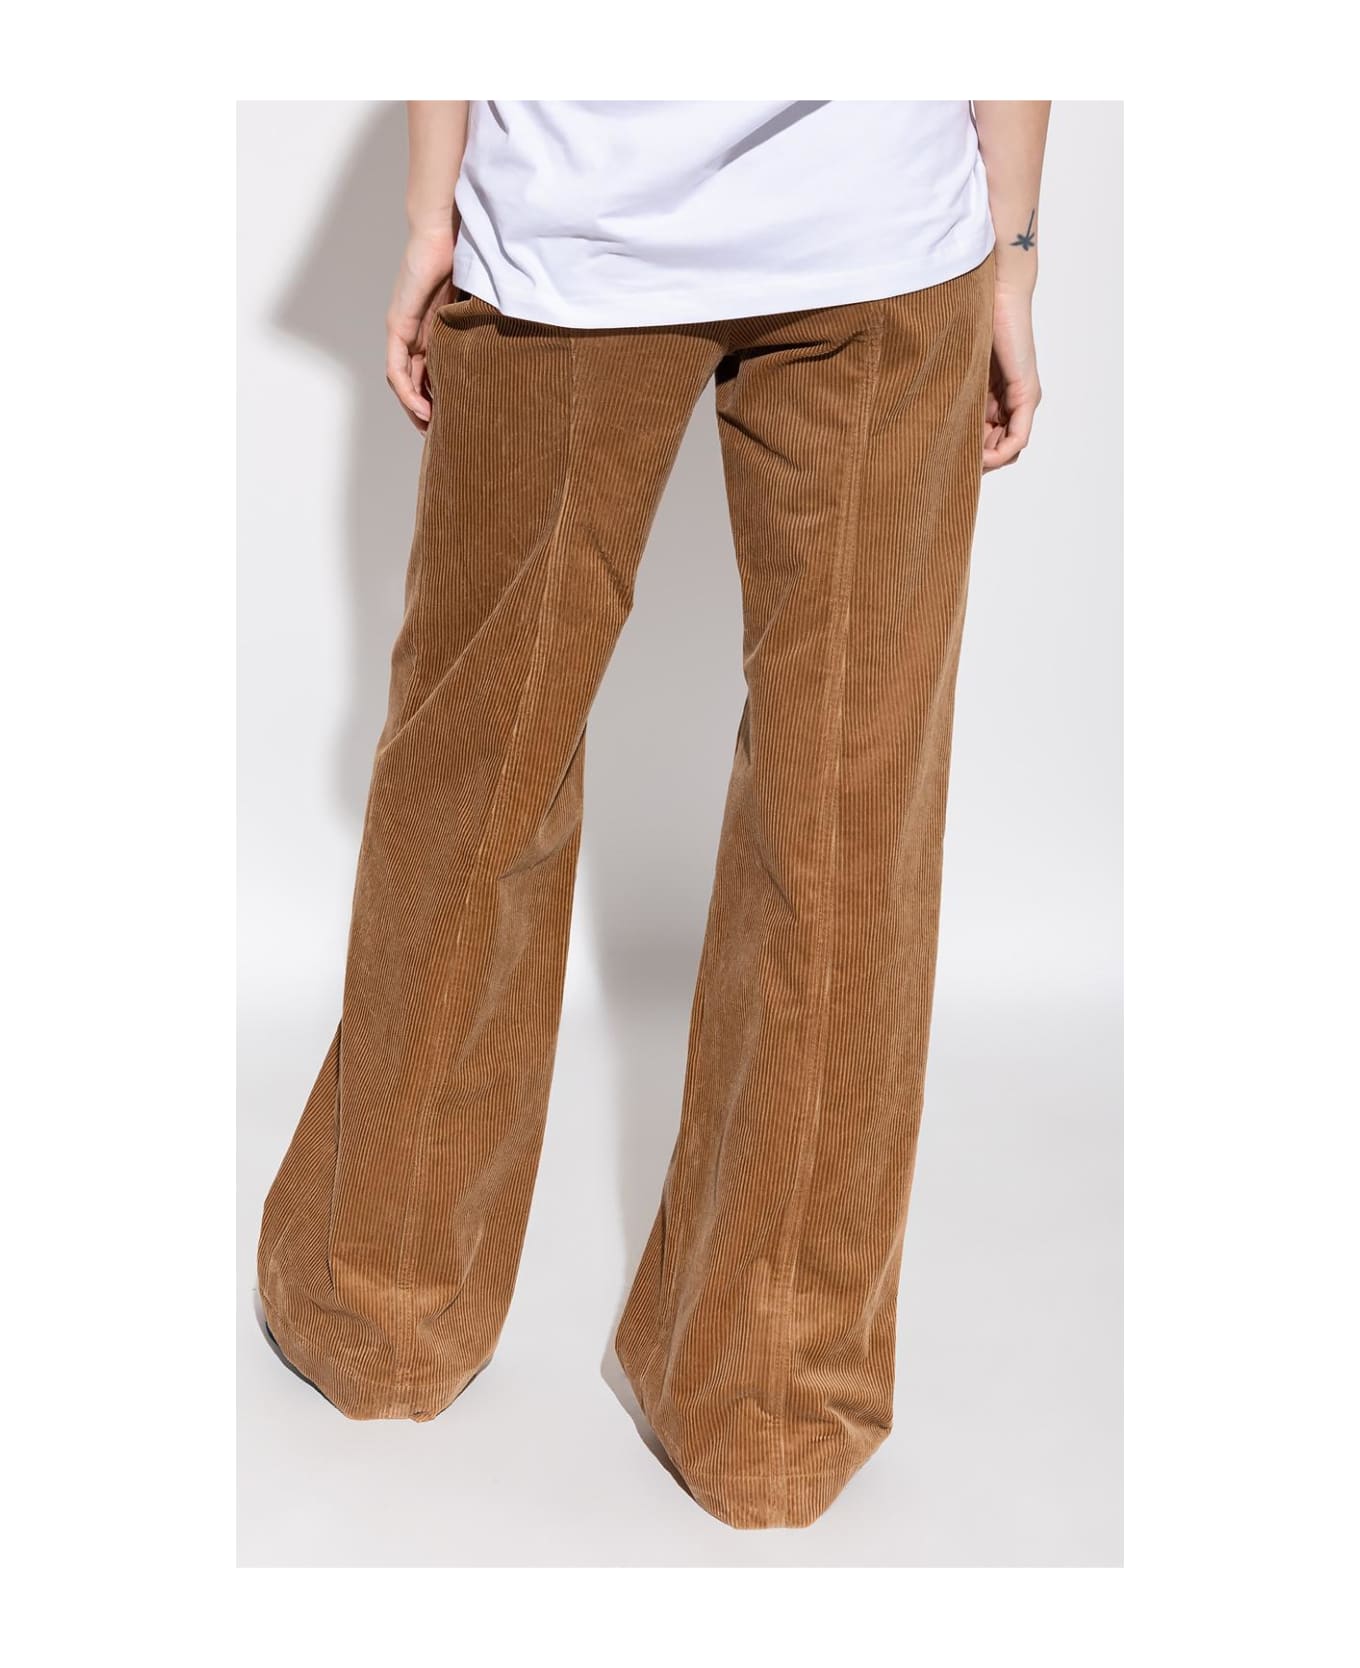 Burberry 'blakely' Corduroy Trousers - CAMEL